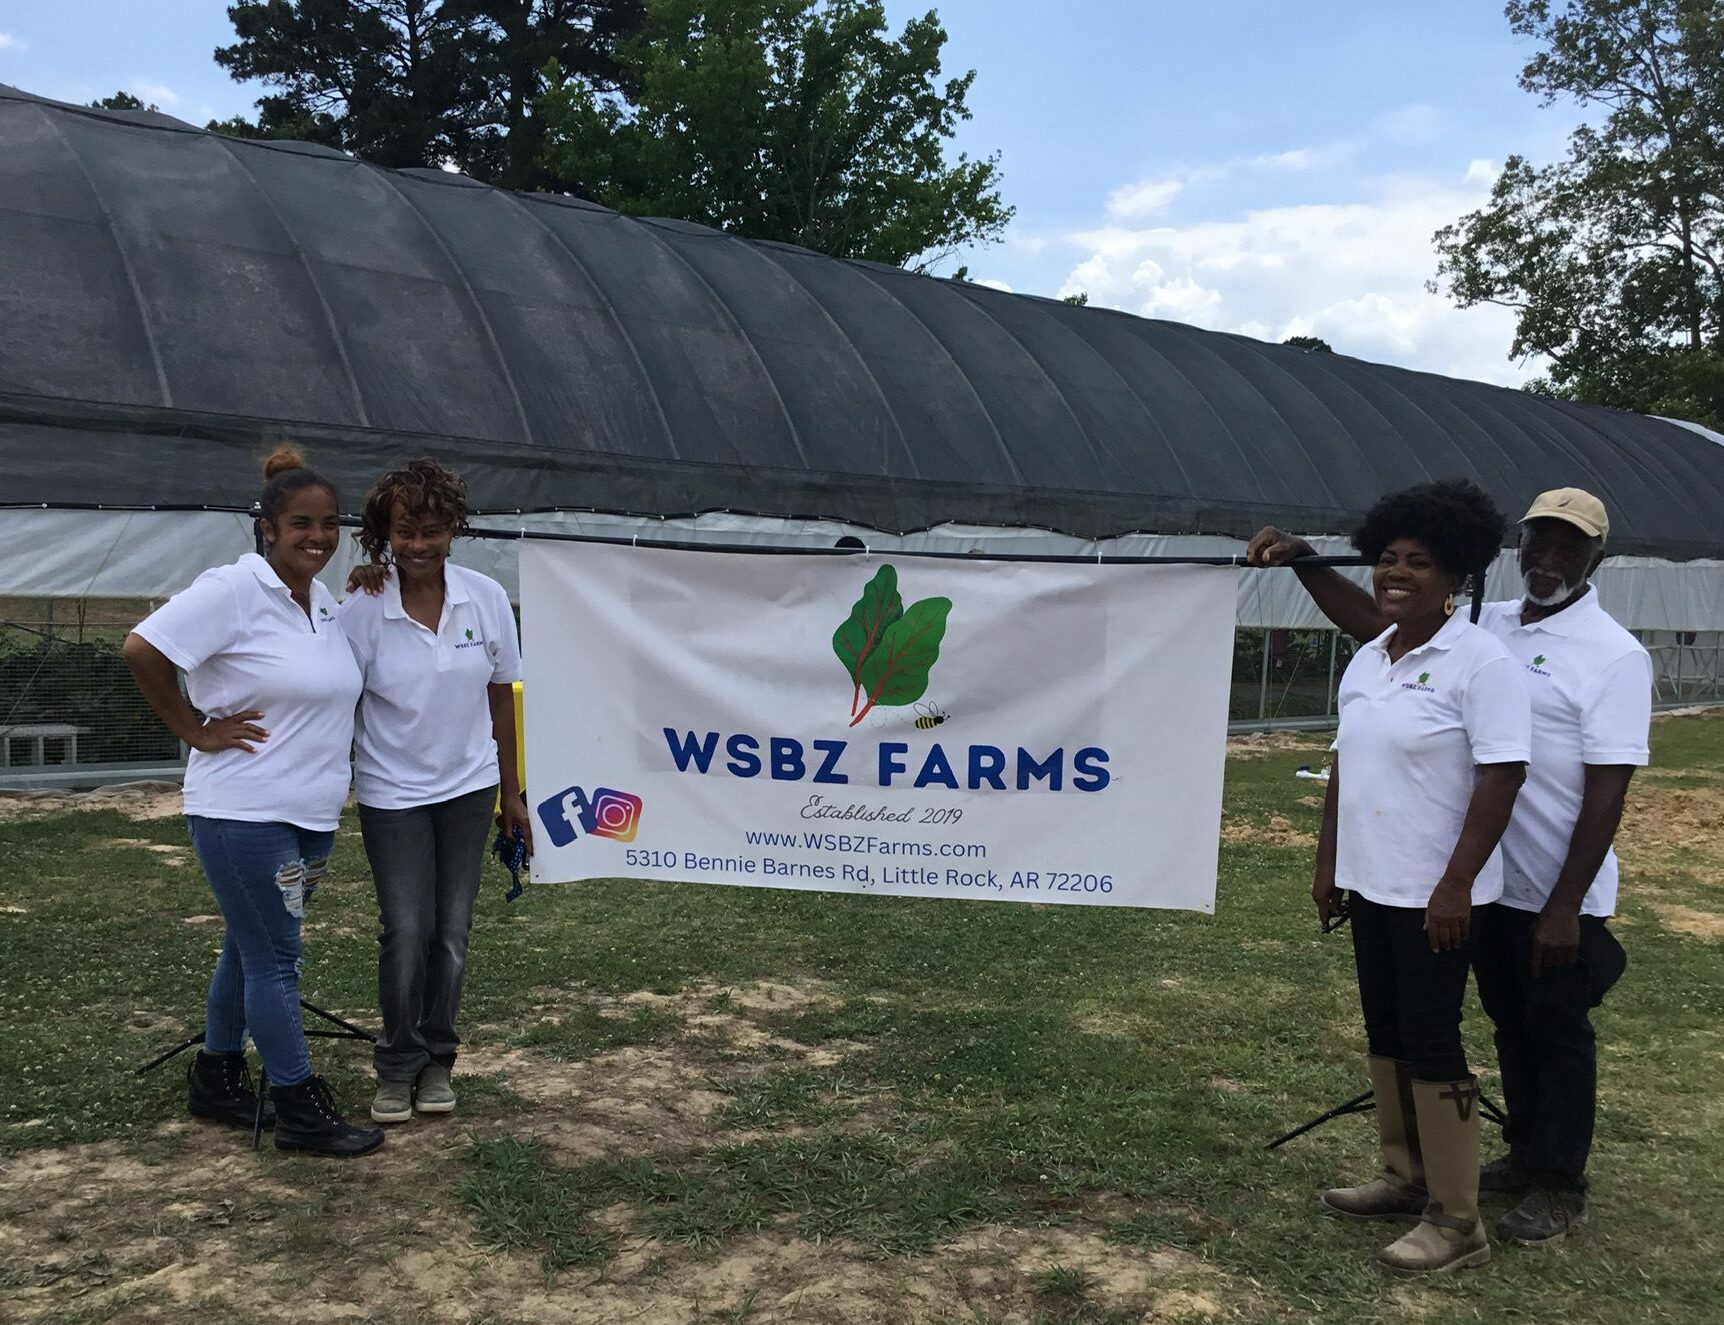 Liz Bell-Simpson and her daughter Josefina Thomas have used a trailer from Cargill's Black Farmers Initiative to create a beneficial partnership for other small-scale growers in their area